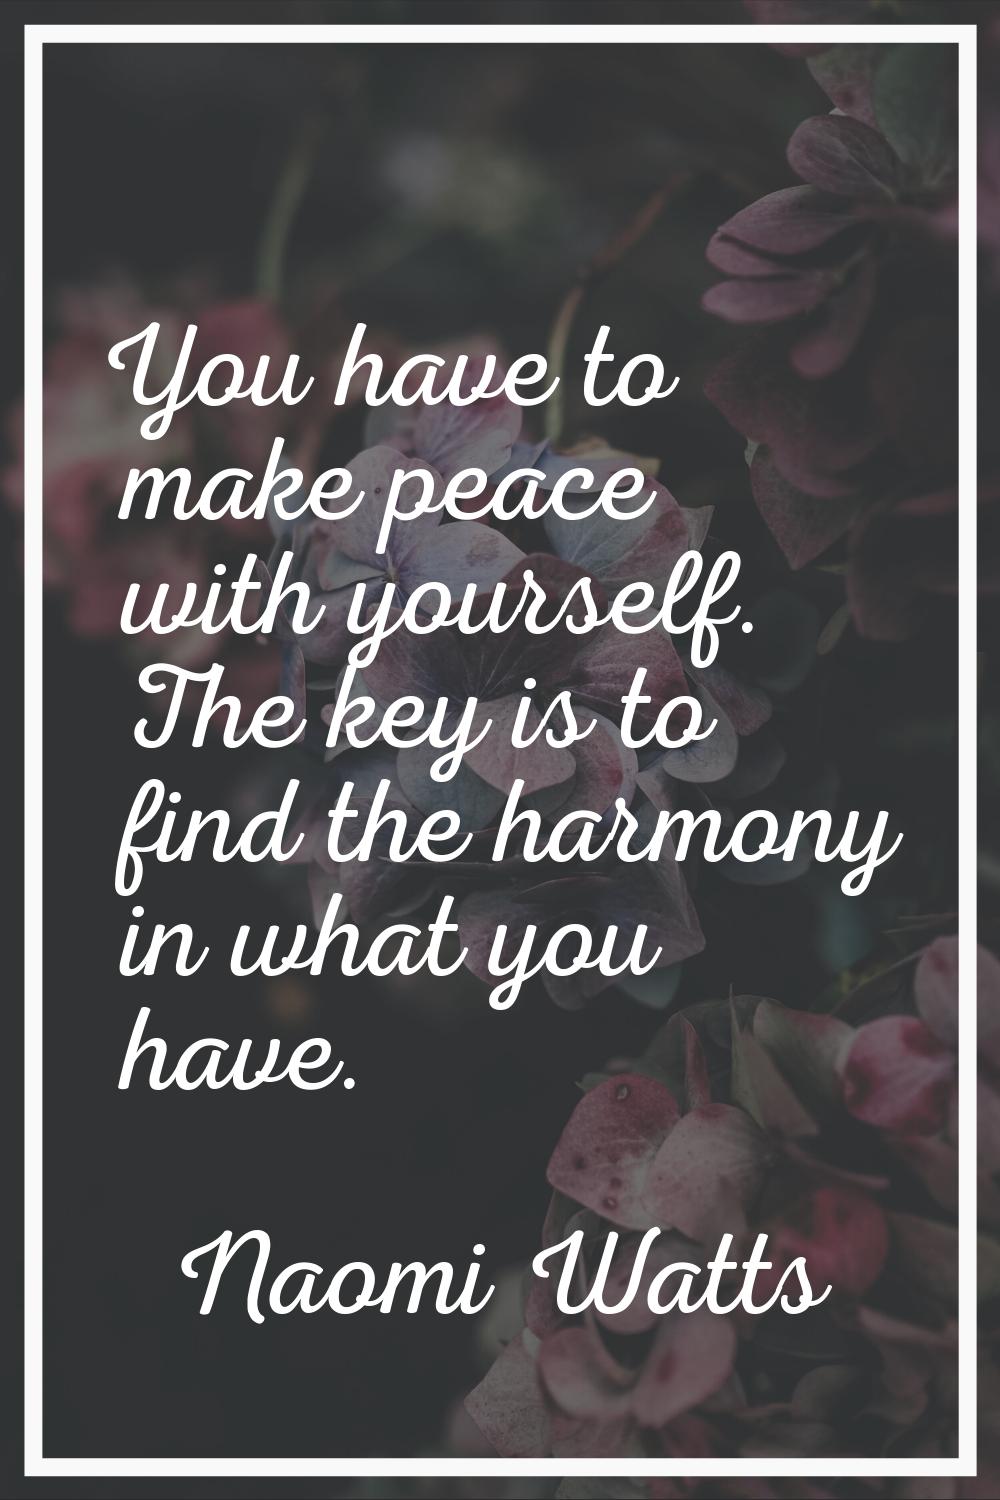 You have to make peace with yourself. The key is to find the harmony in what you have.